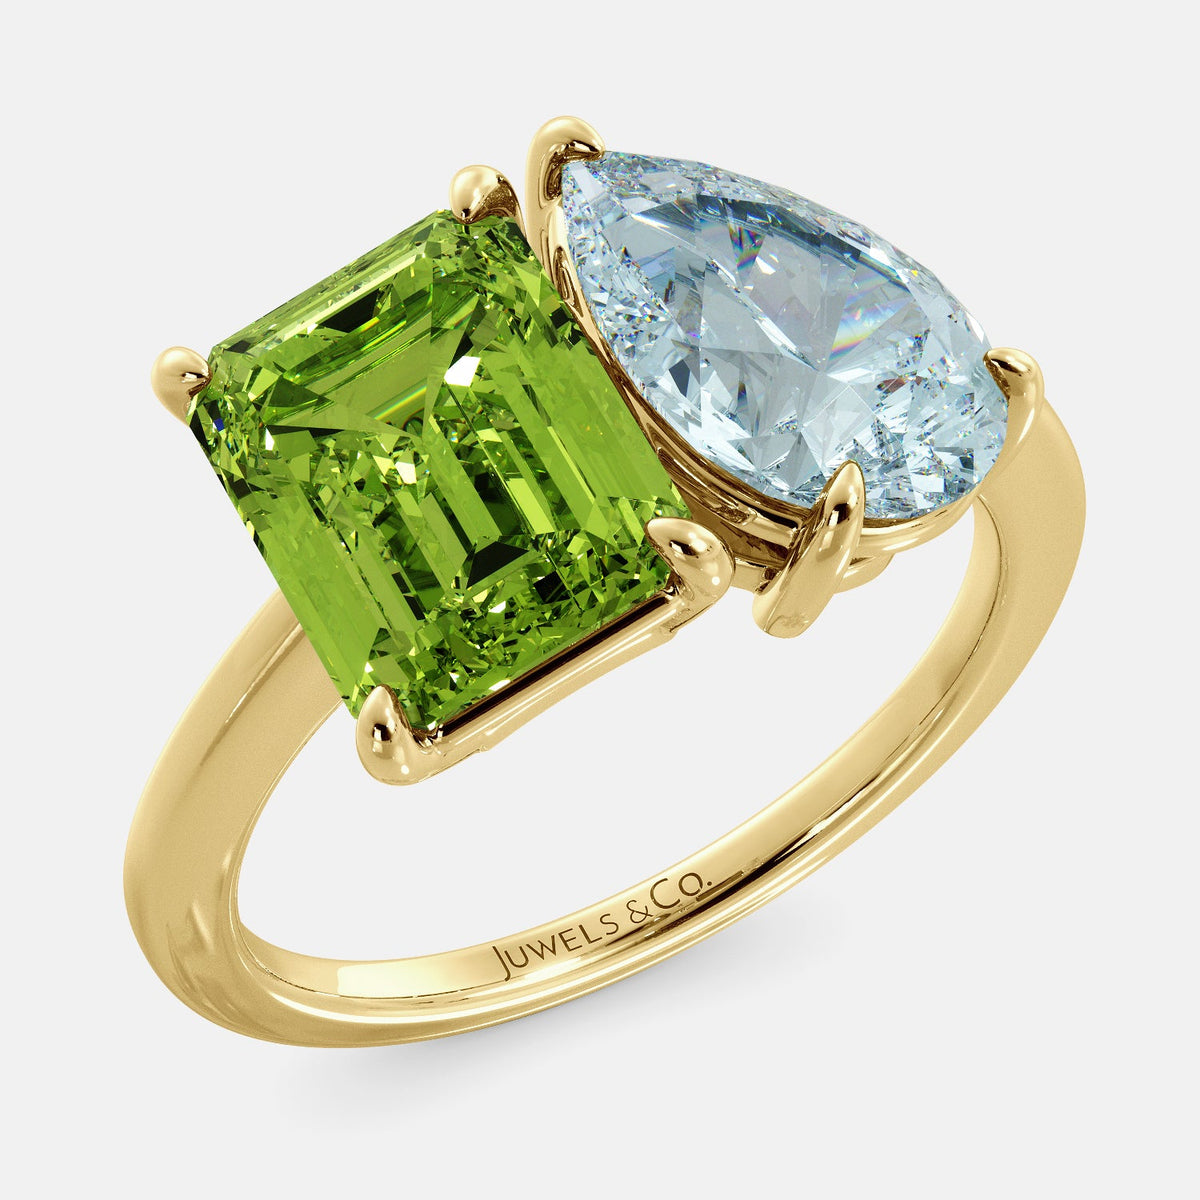 A toi et moi ring with an emerald-cut Green Peridot and a pear-cut gemstone. The emerald-cut morganite is set on the left of the ring, and the pear-cut gemstone is set on the right. The ring is made of recycled yellow gold and has a simple, elegant design. The pear-cut gemstone can be customized. **Here are some additional details about the image:** * The emerald-cut white Green Peridot is a birthstone for August. * The pear-cut gemstone can be customized to any stone of your choice.